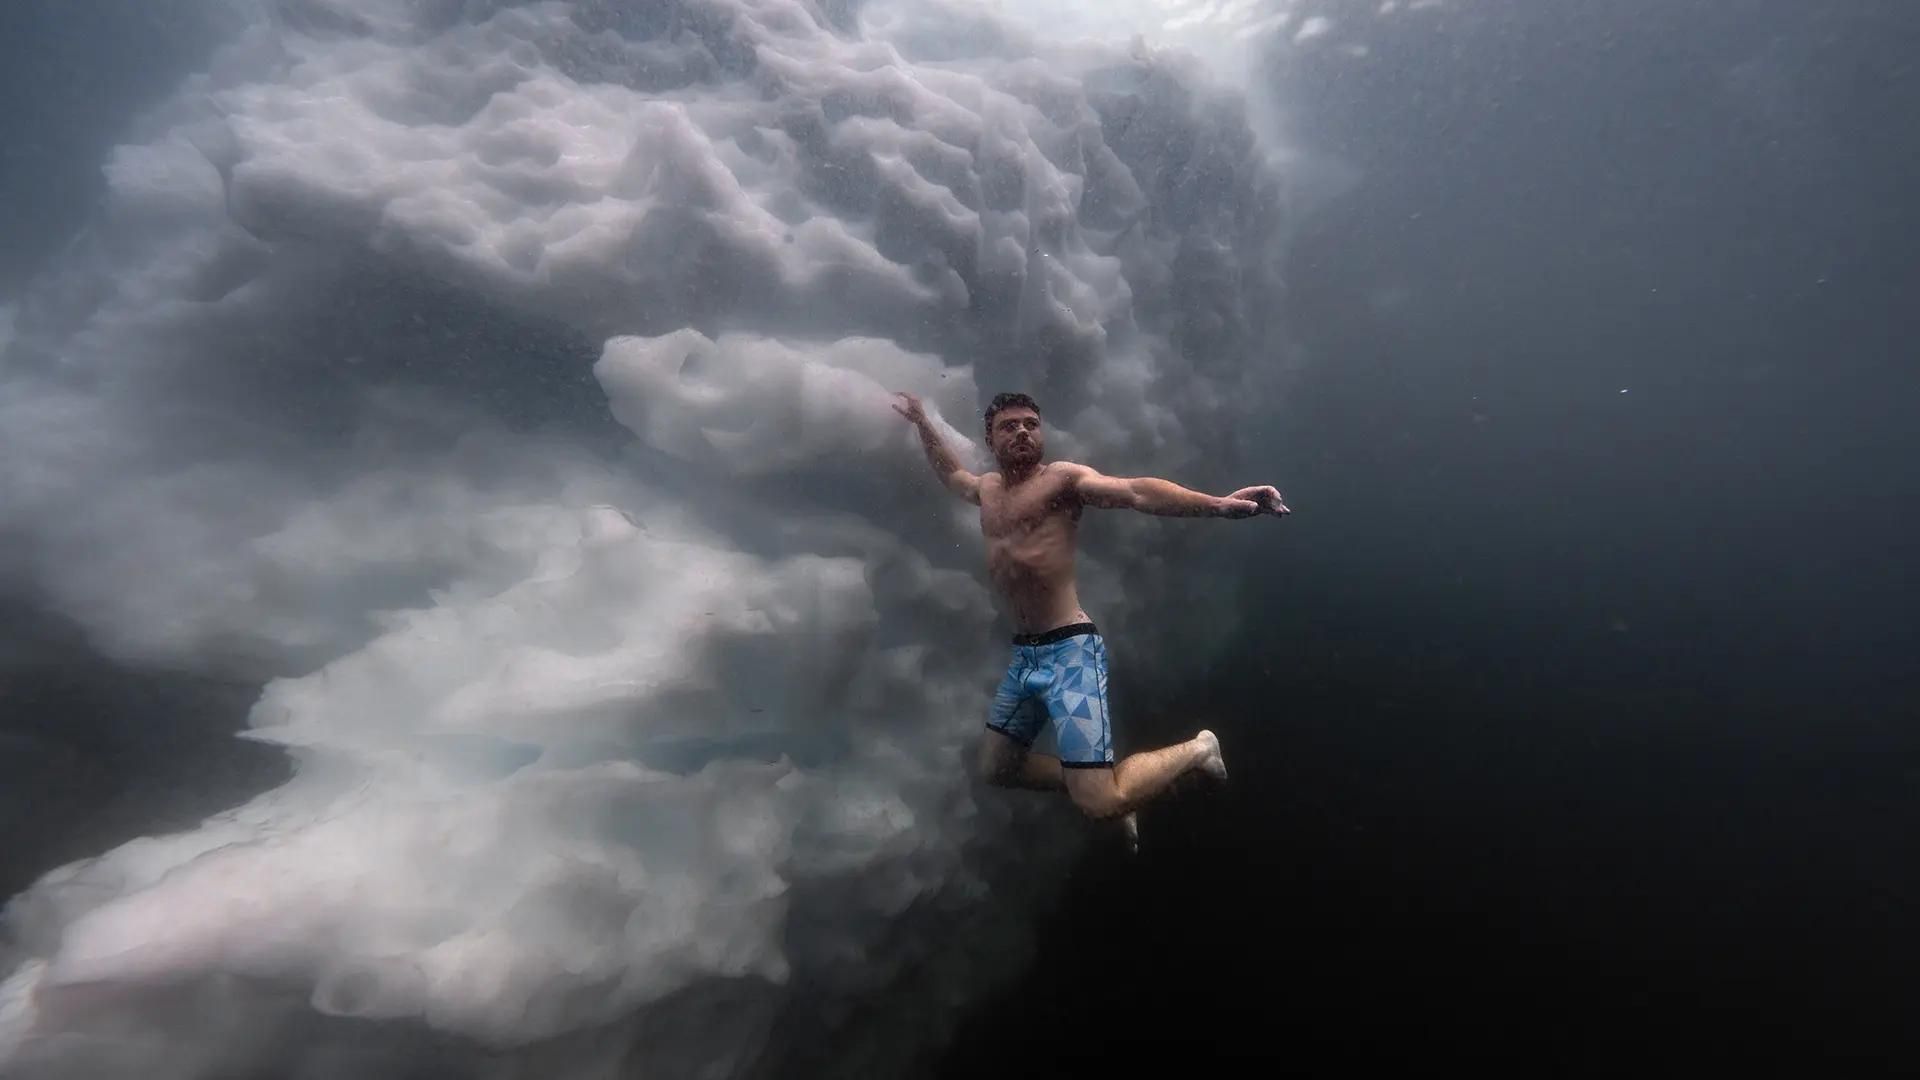 Spectacular underwater view of a man, dressed in thigh-long underwear, diving and holding onto an iceberg.